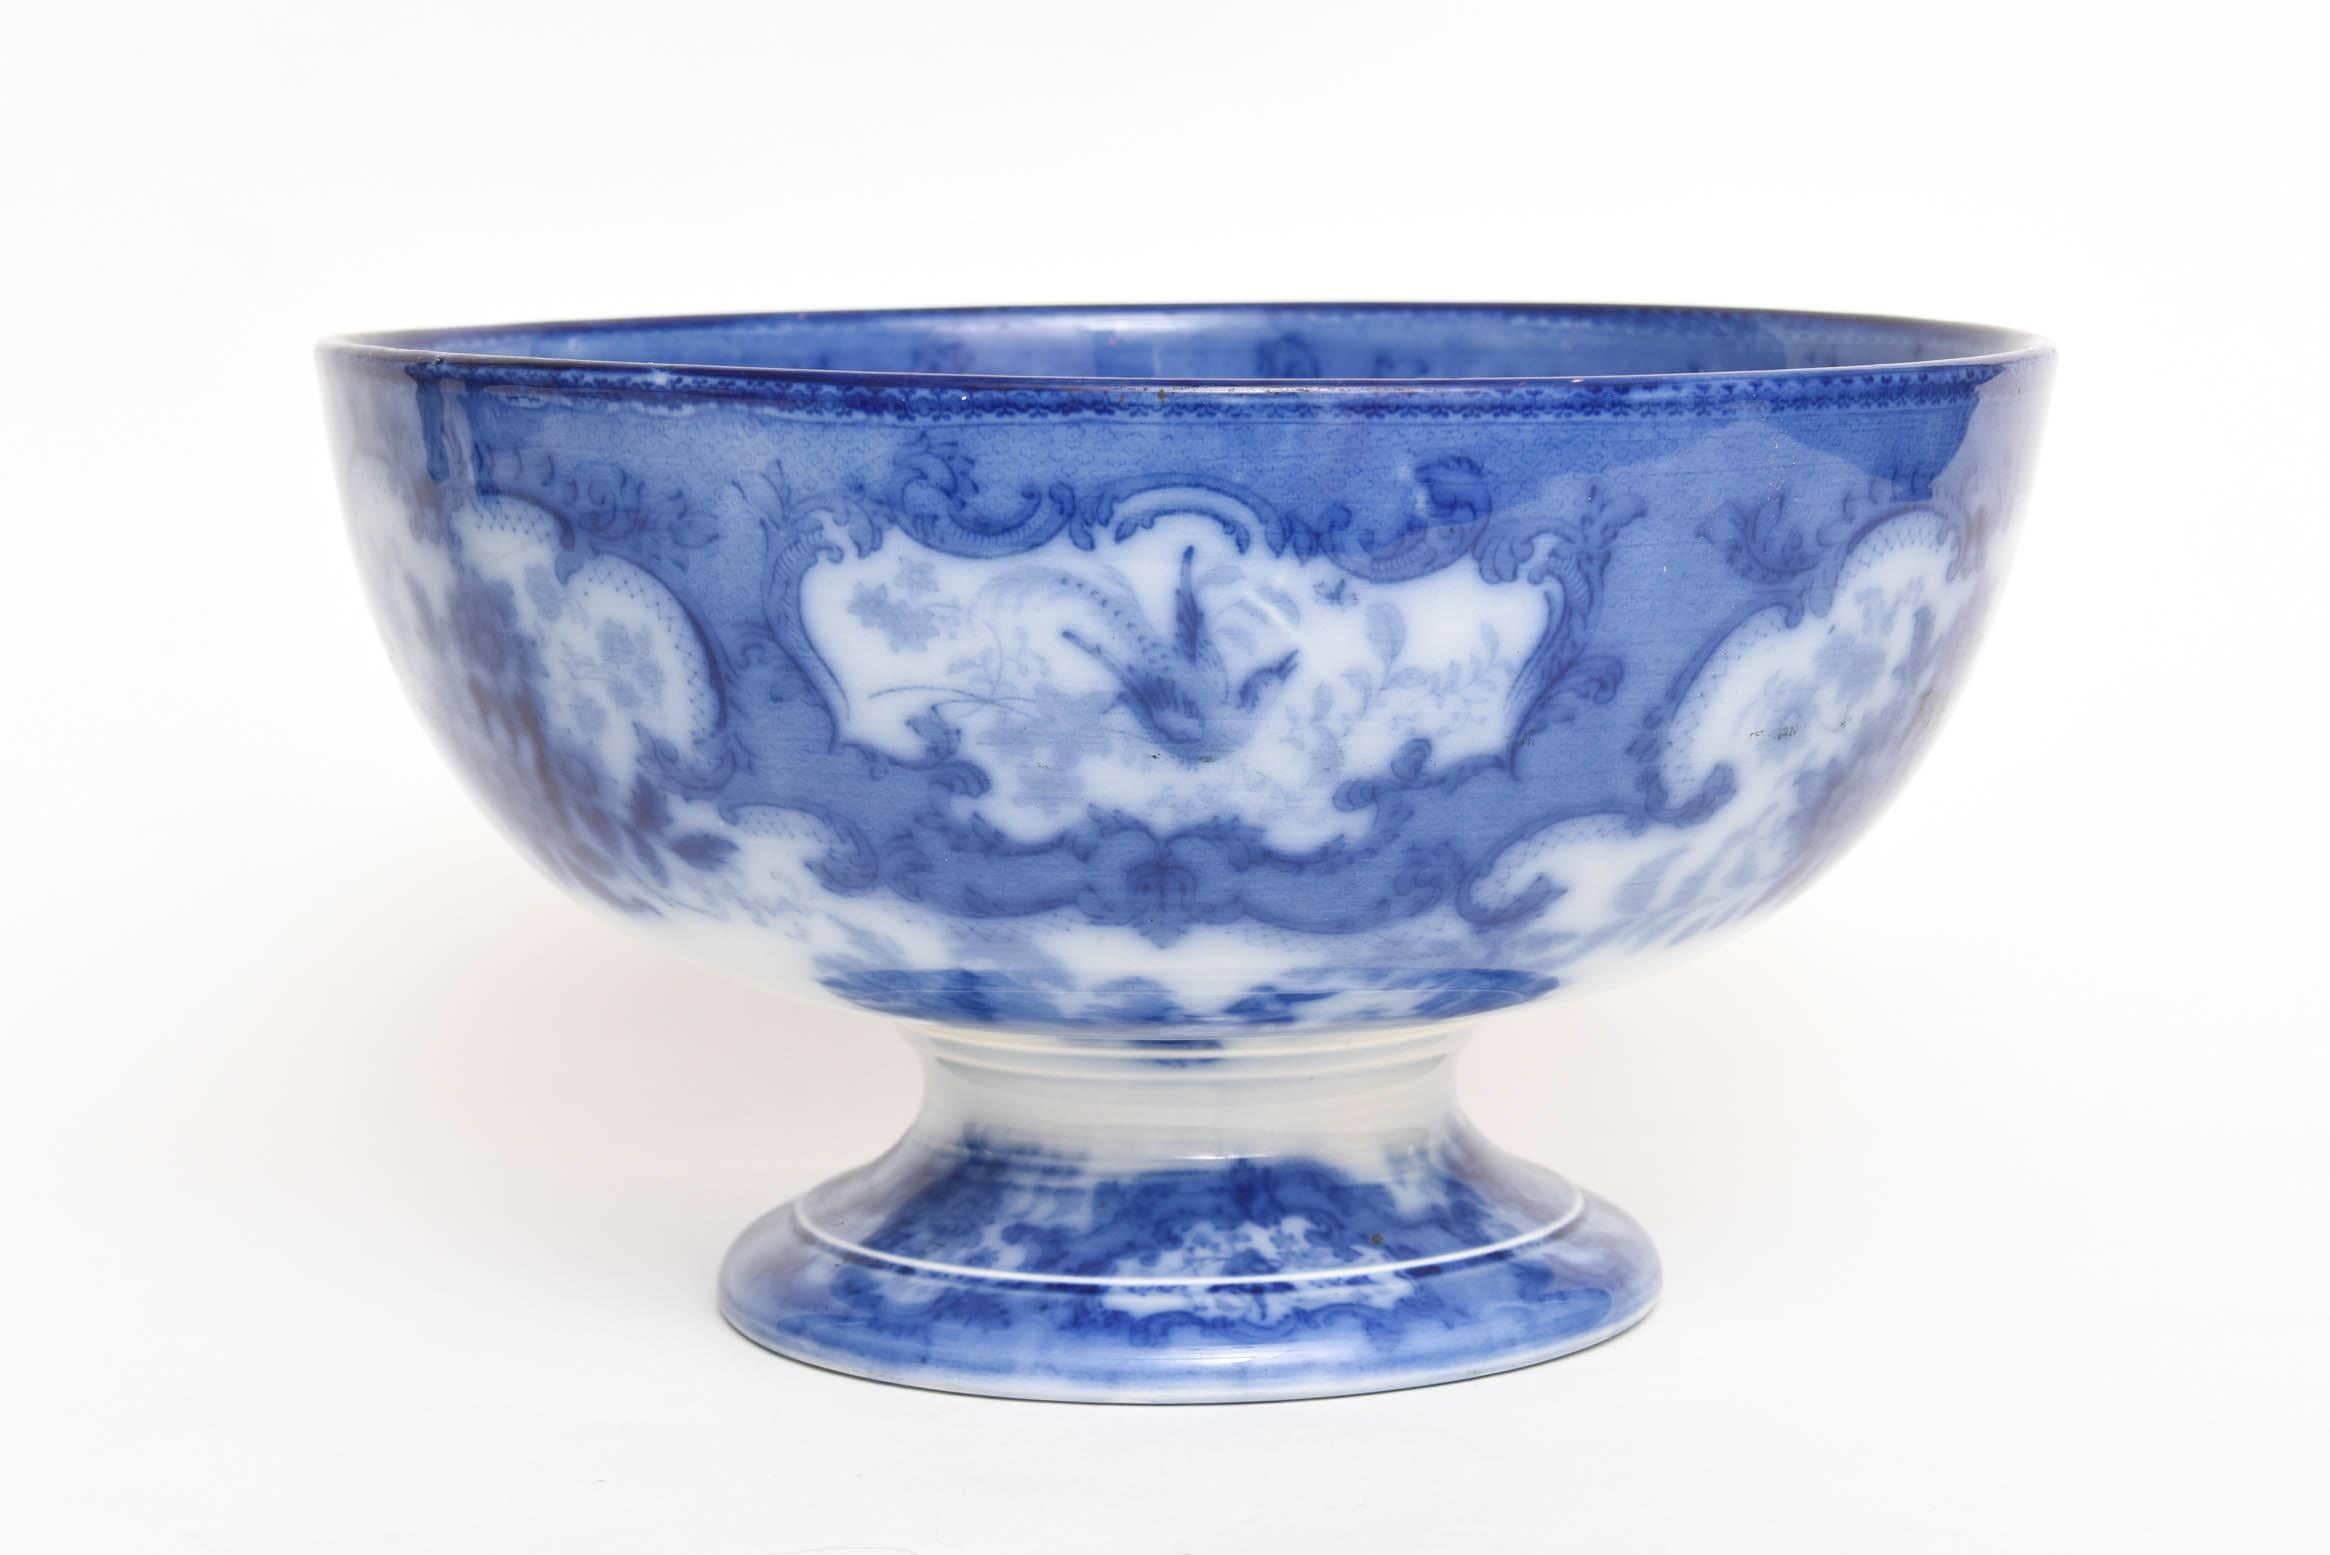 A charming pedestal porcelain punch bowl dating to the last quarter 19th century. This beautifully colored blue (flowing) bowl has nice proportions and is in very good antique condition with no chips, cracks or color fade. We love the center scenic